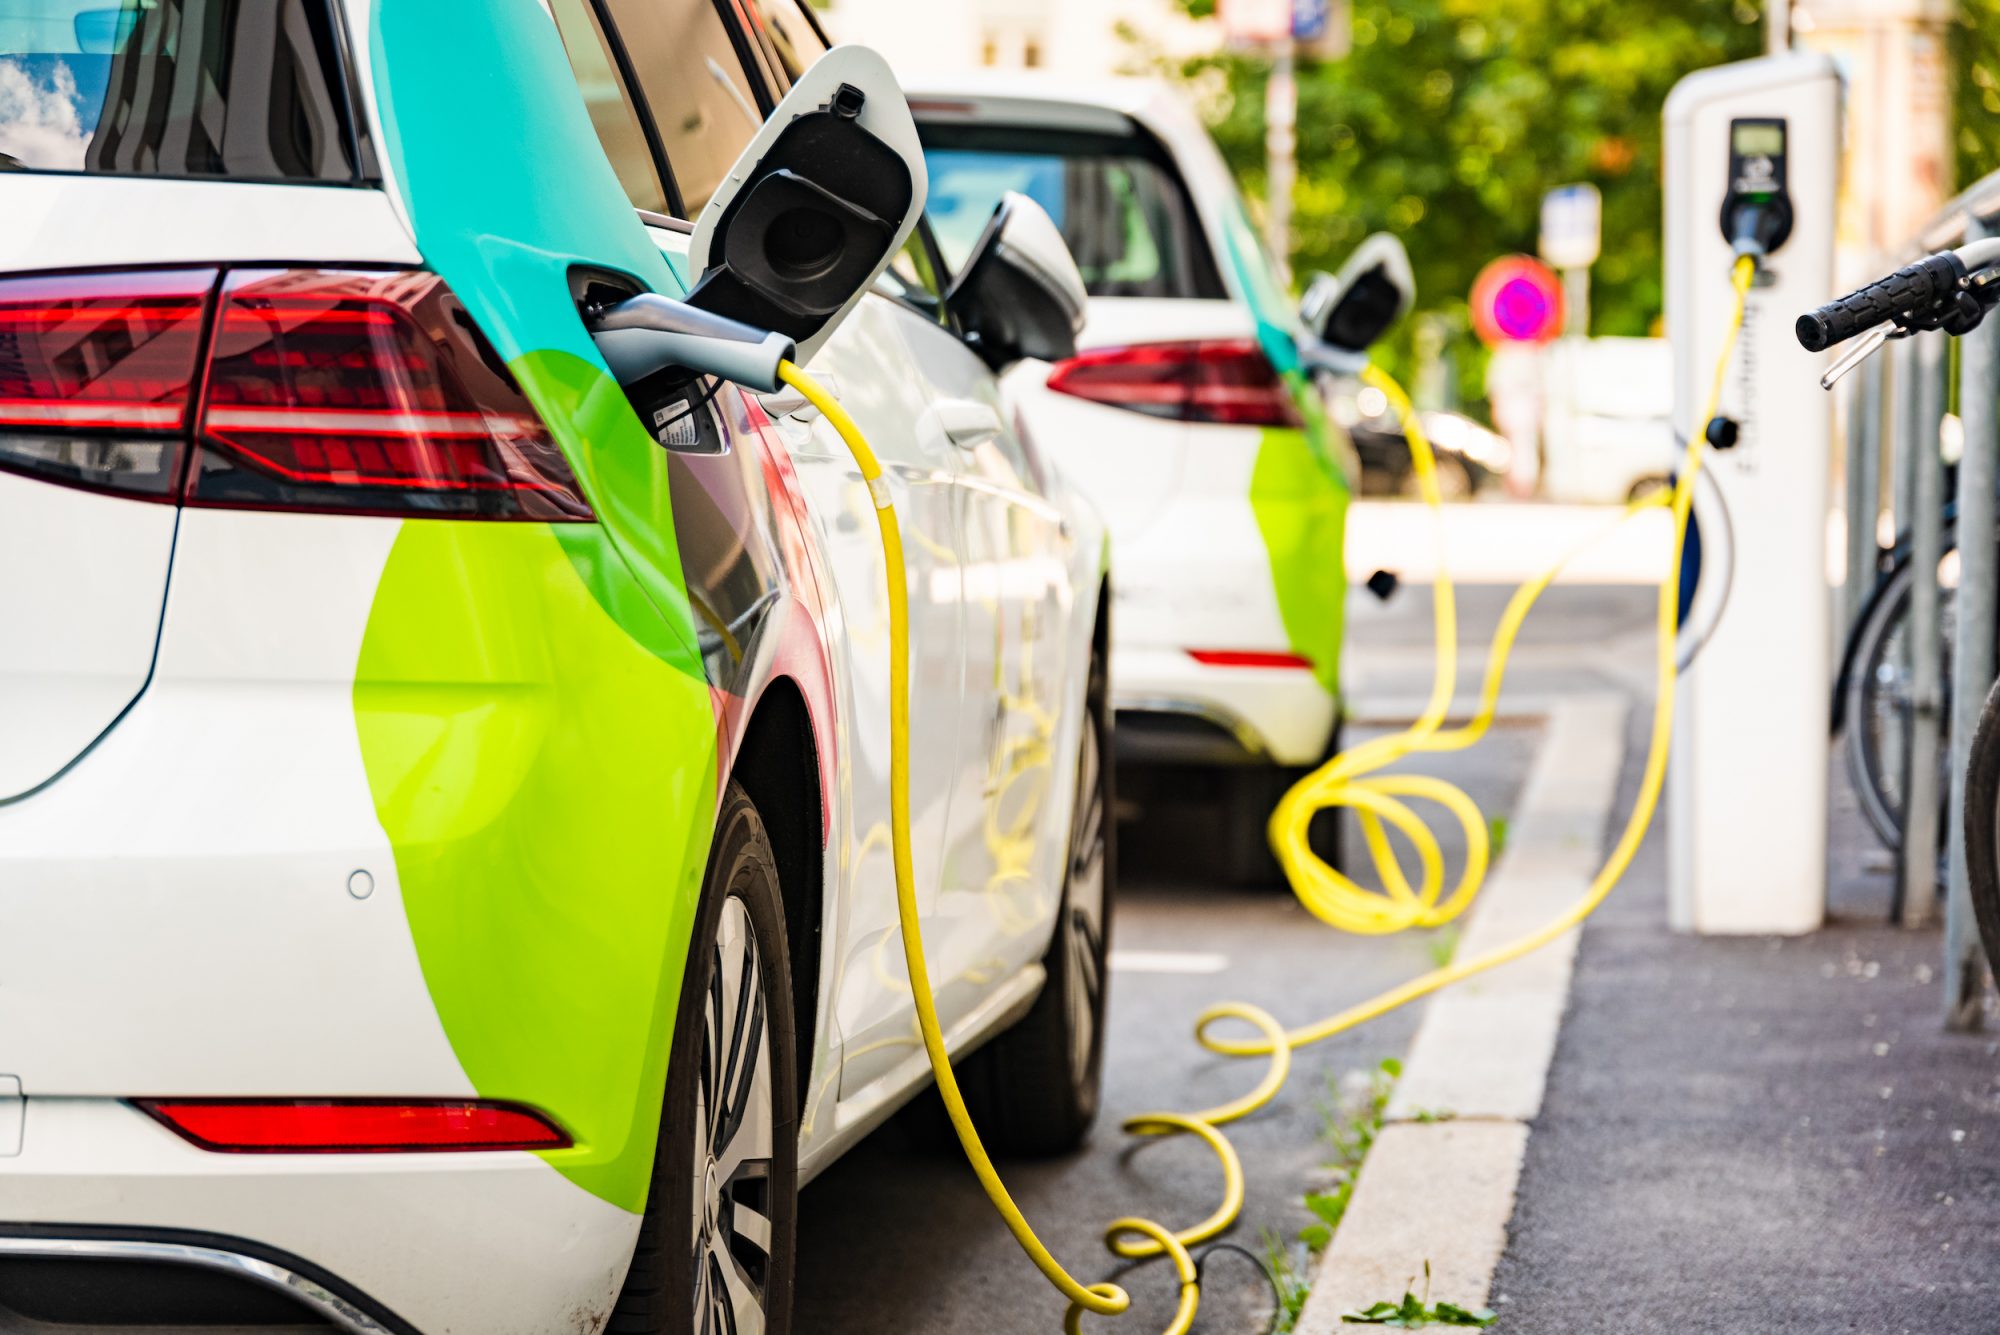 Qatar is leading the shift towards electric vehicles in the region